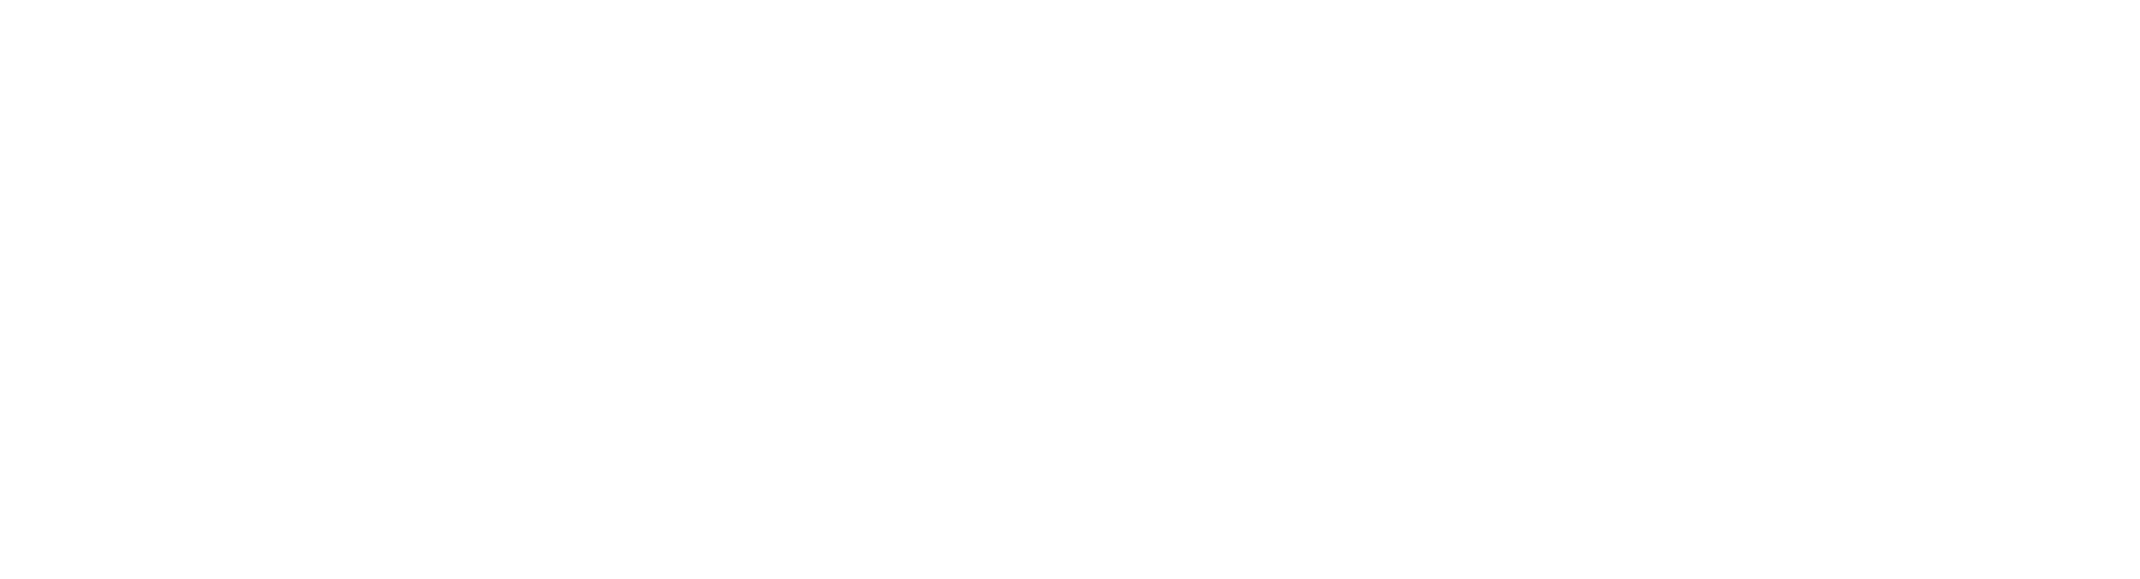 NSGC Professional Status Survey Analysis of survey data from genetic counselors, which identifies emerging trends in ...